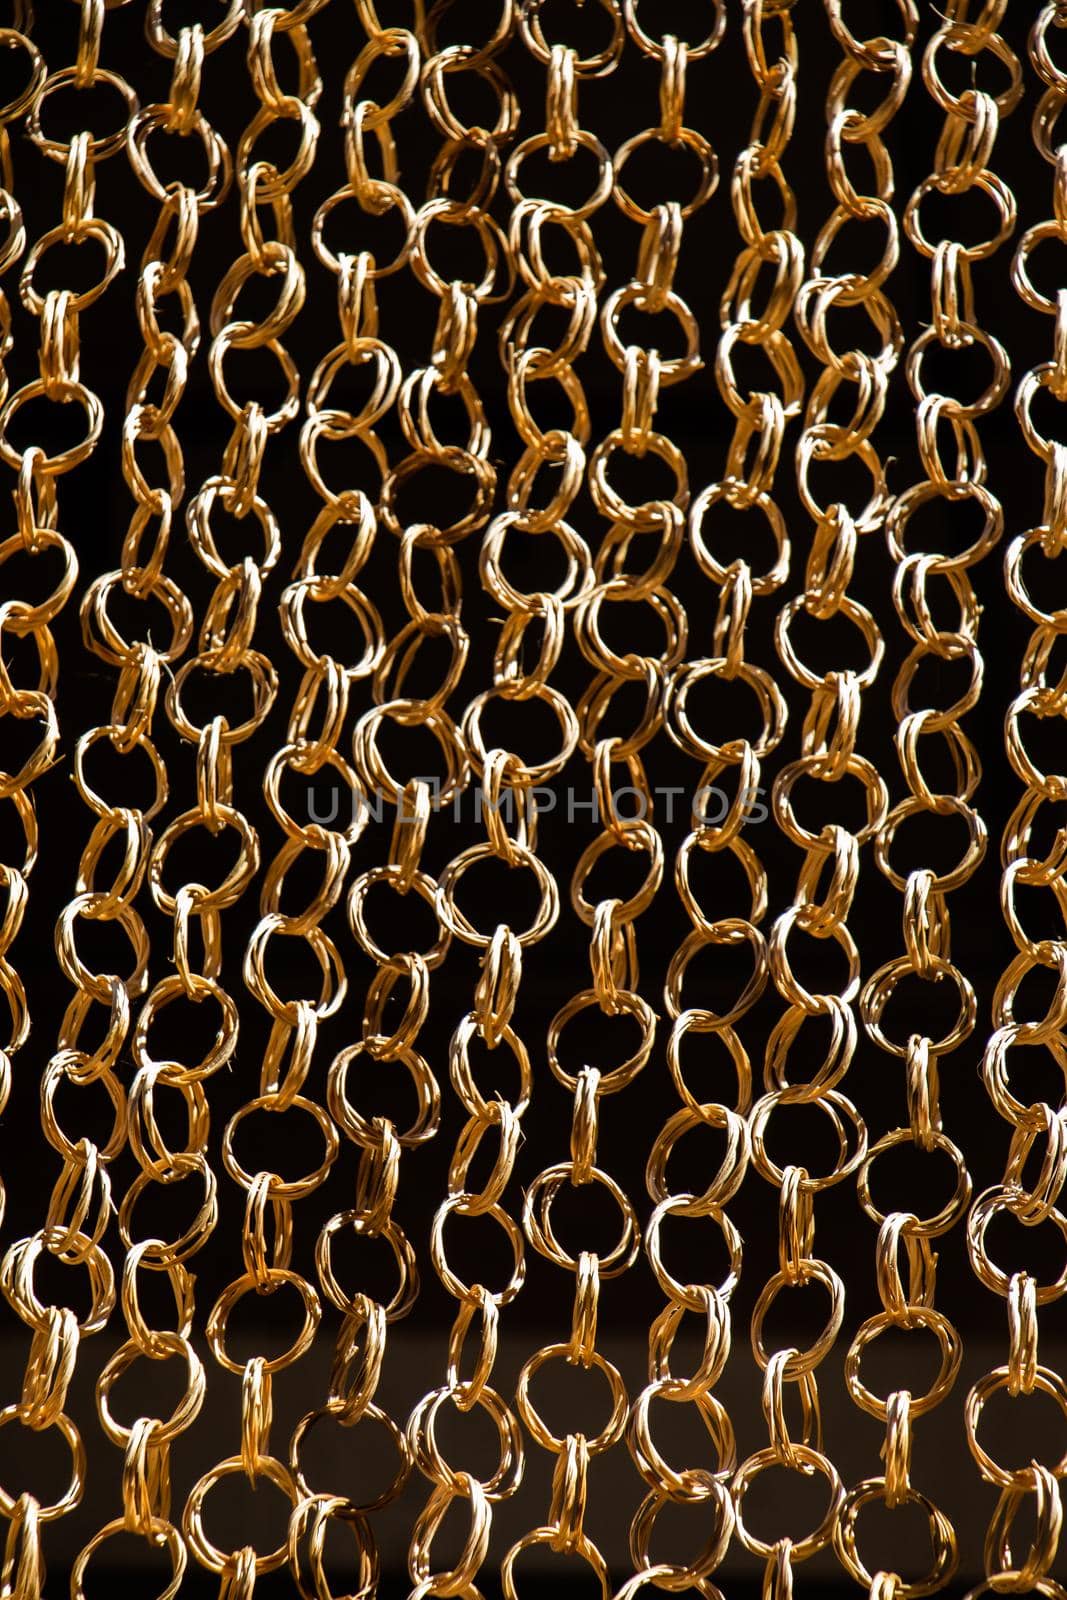 Straw chains as textured background. by berkay